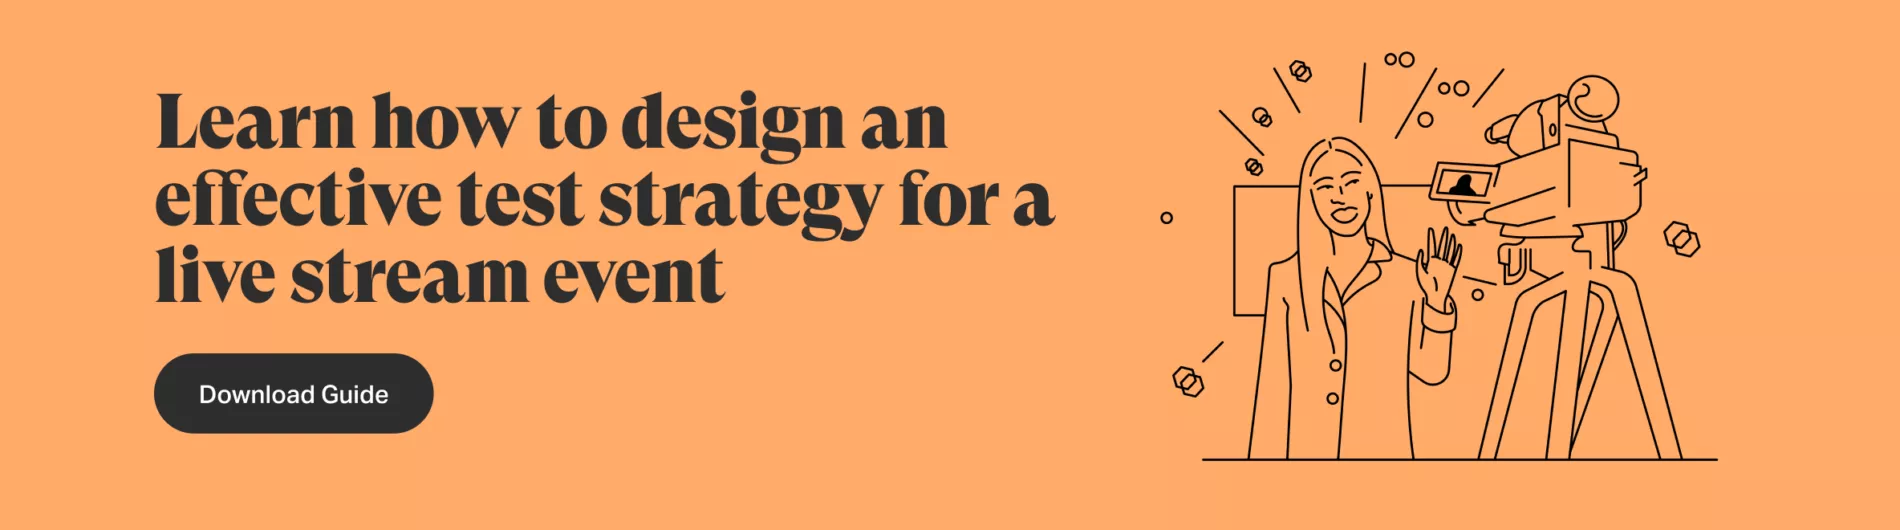 Download guide button to learn how to design an effective test strategy for a live stream event. 